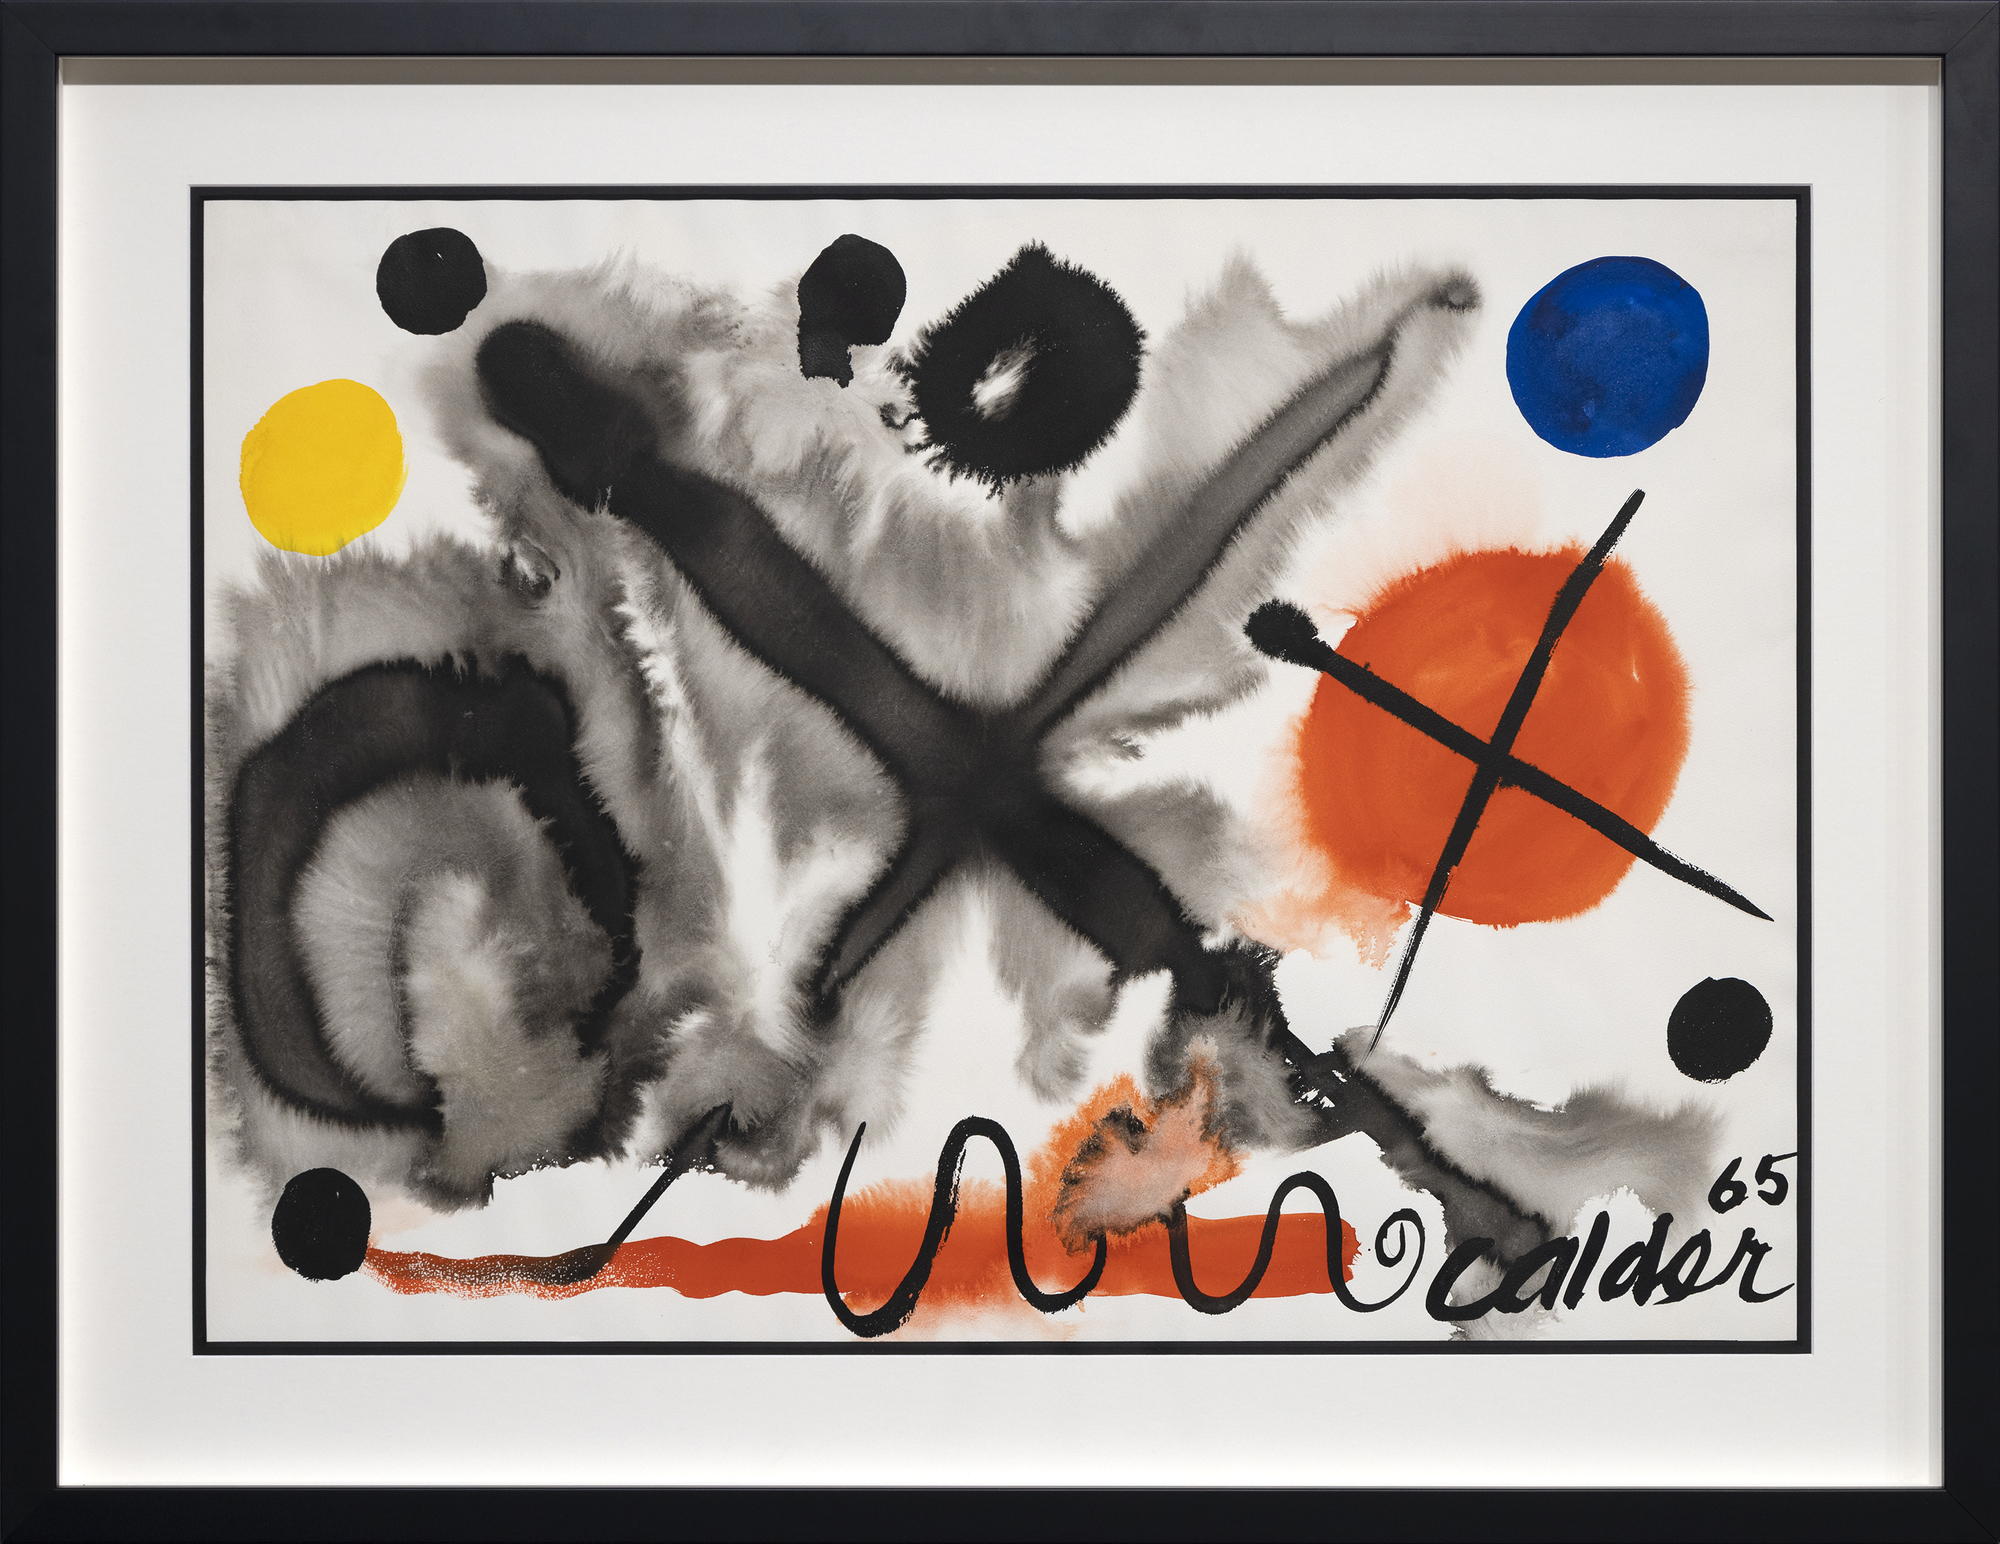 © 2023 Calder Foundation, New York / Artists Rights Society (ARS), New York
<br>Two Crosses by Alexander Calder is a striking work on paper, blending transparent watercolor and gouache, showcasing his signature repertoire of shapes and symbols. At its heart lies a large, black 'X' on a fluid, grayish wash, and nearby, a smaller, opaque black cross overlapping a semi-opaque red ball, and to its left, a roundish transparent wash patch hosts a black crescent shape. Several spheres in black provide accompaniment, and the artist's favored primary colors, and at the lower margin, his charming undulating line. Calder's sparing use of watercolor allows the paper's white to showcase the forms and symbols, creating a dynamic, impactful artwork where simplicity and the interplay of transparent and opaque elements captivate the viewer.